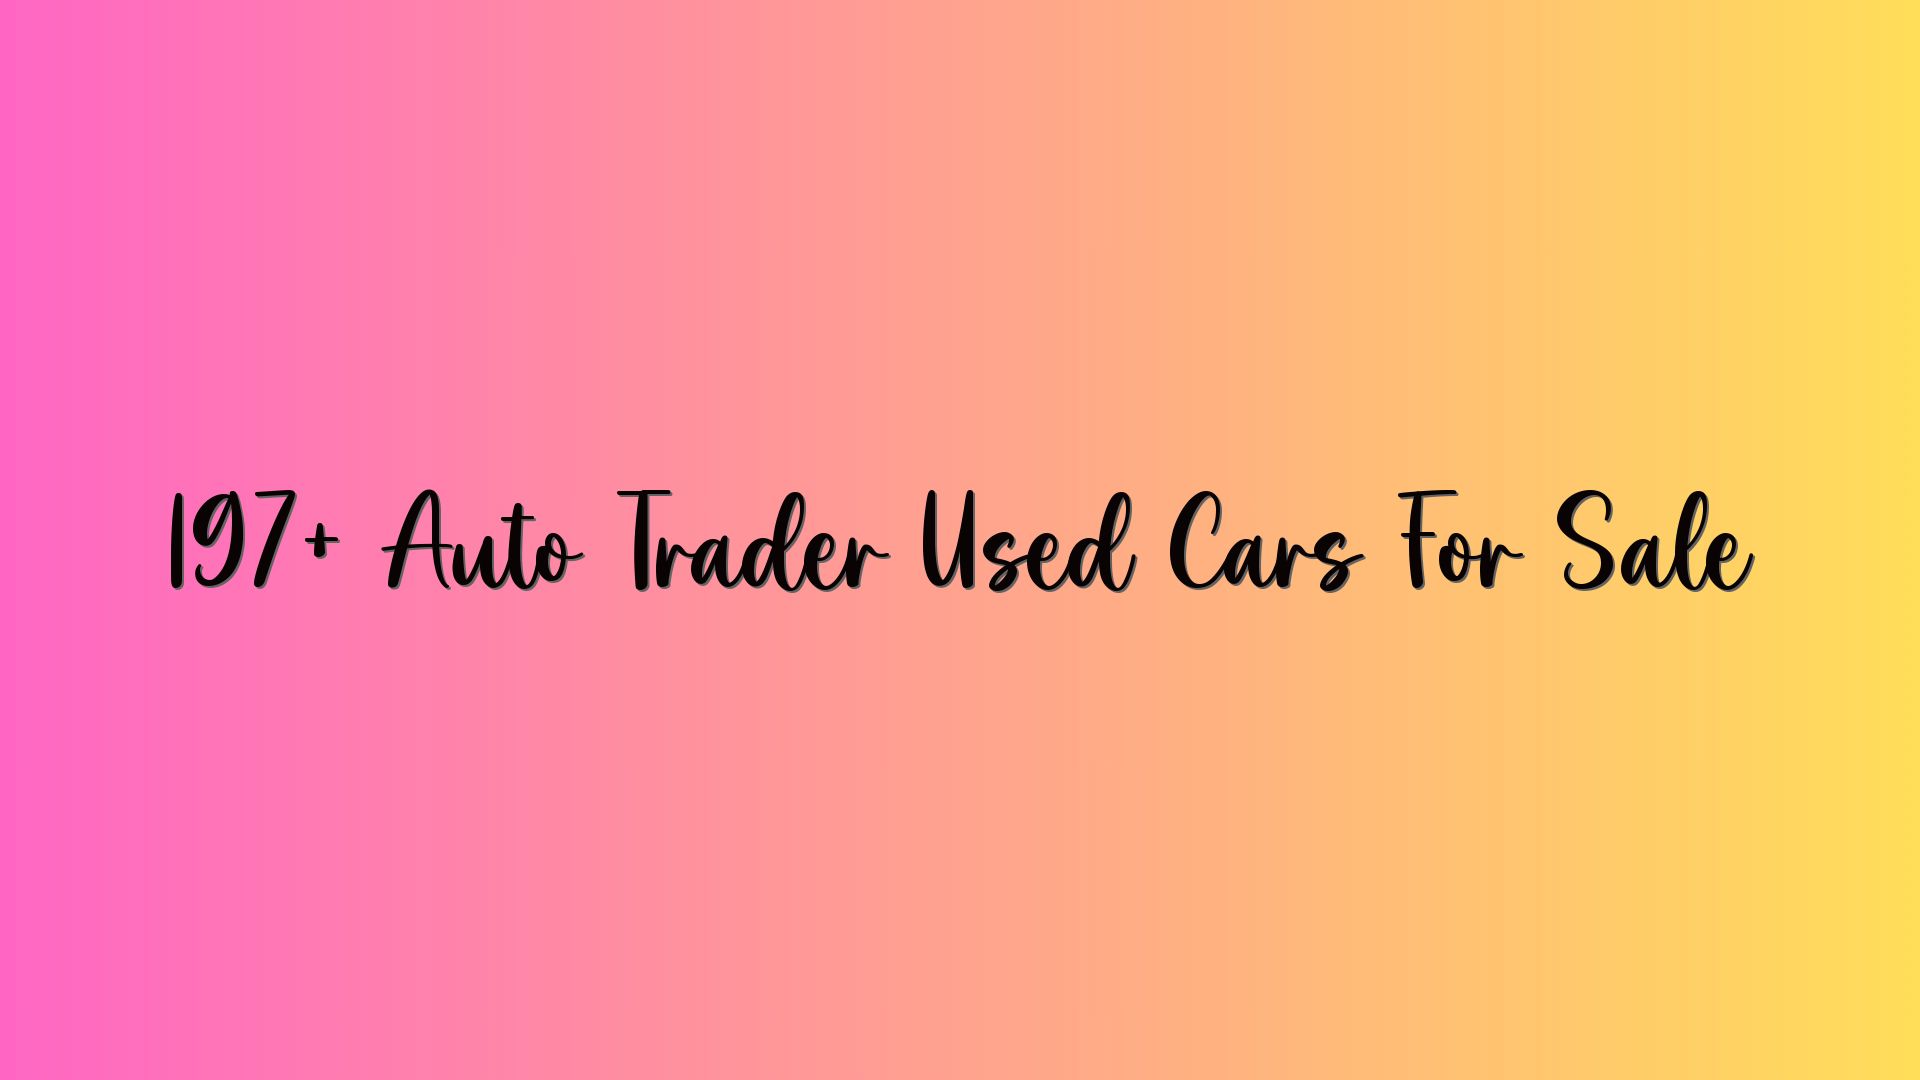 197+ Auto Trader Used Cars For Sale